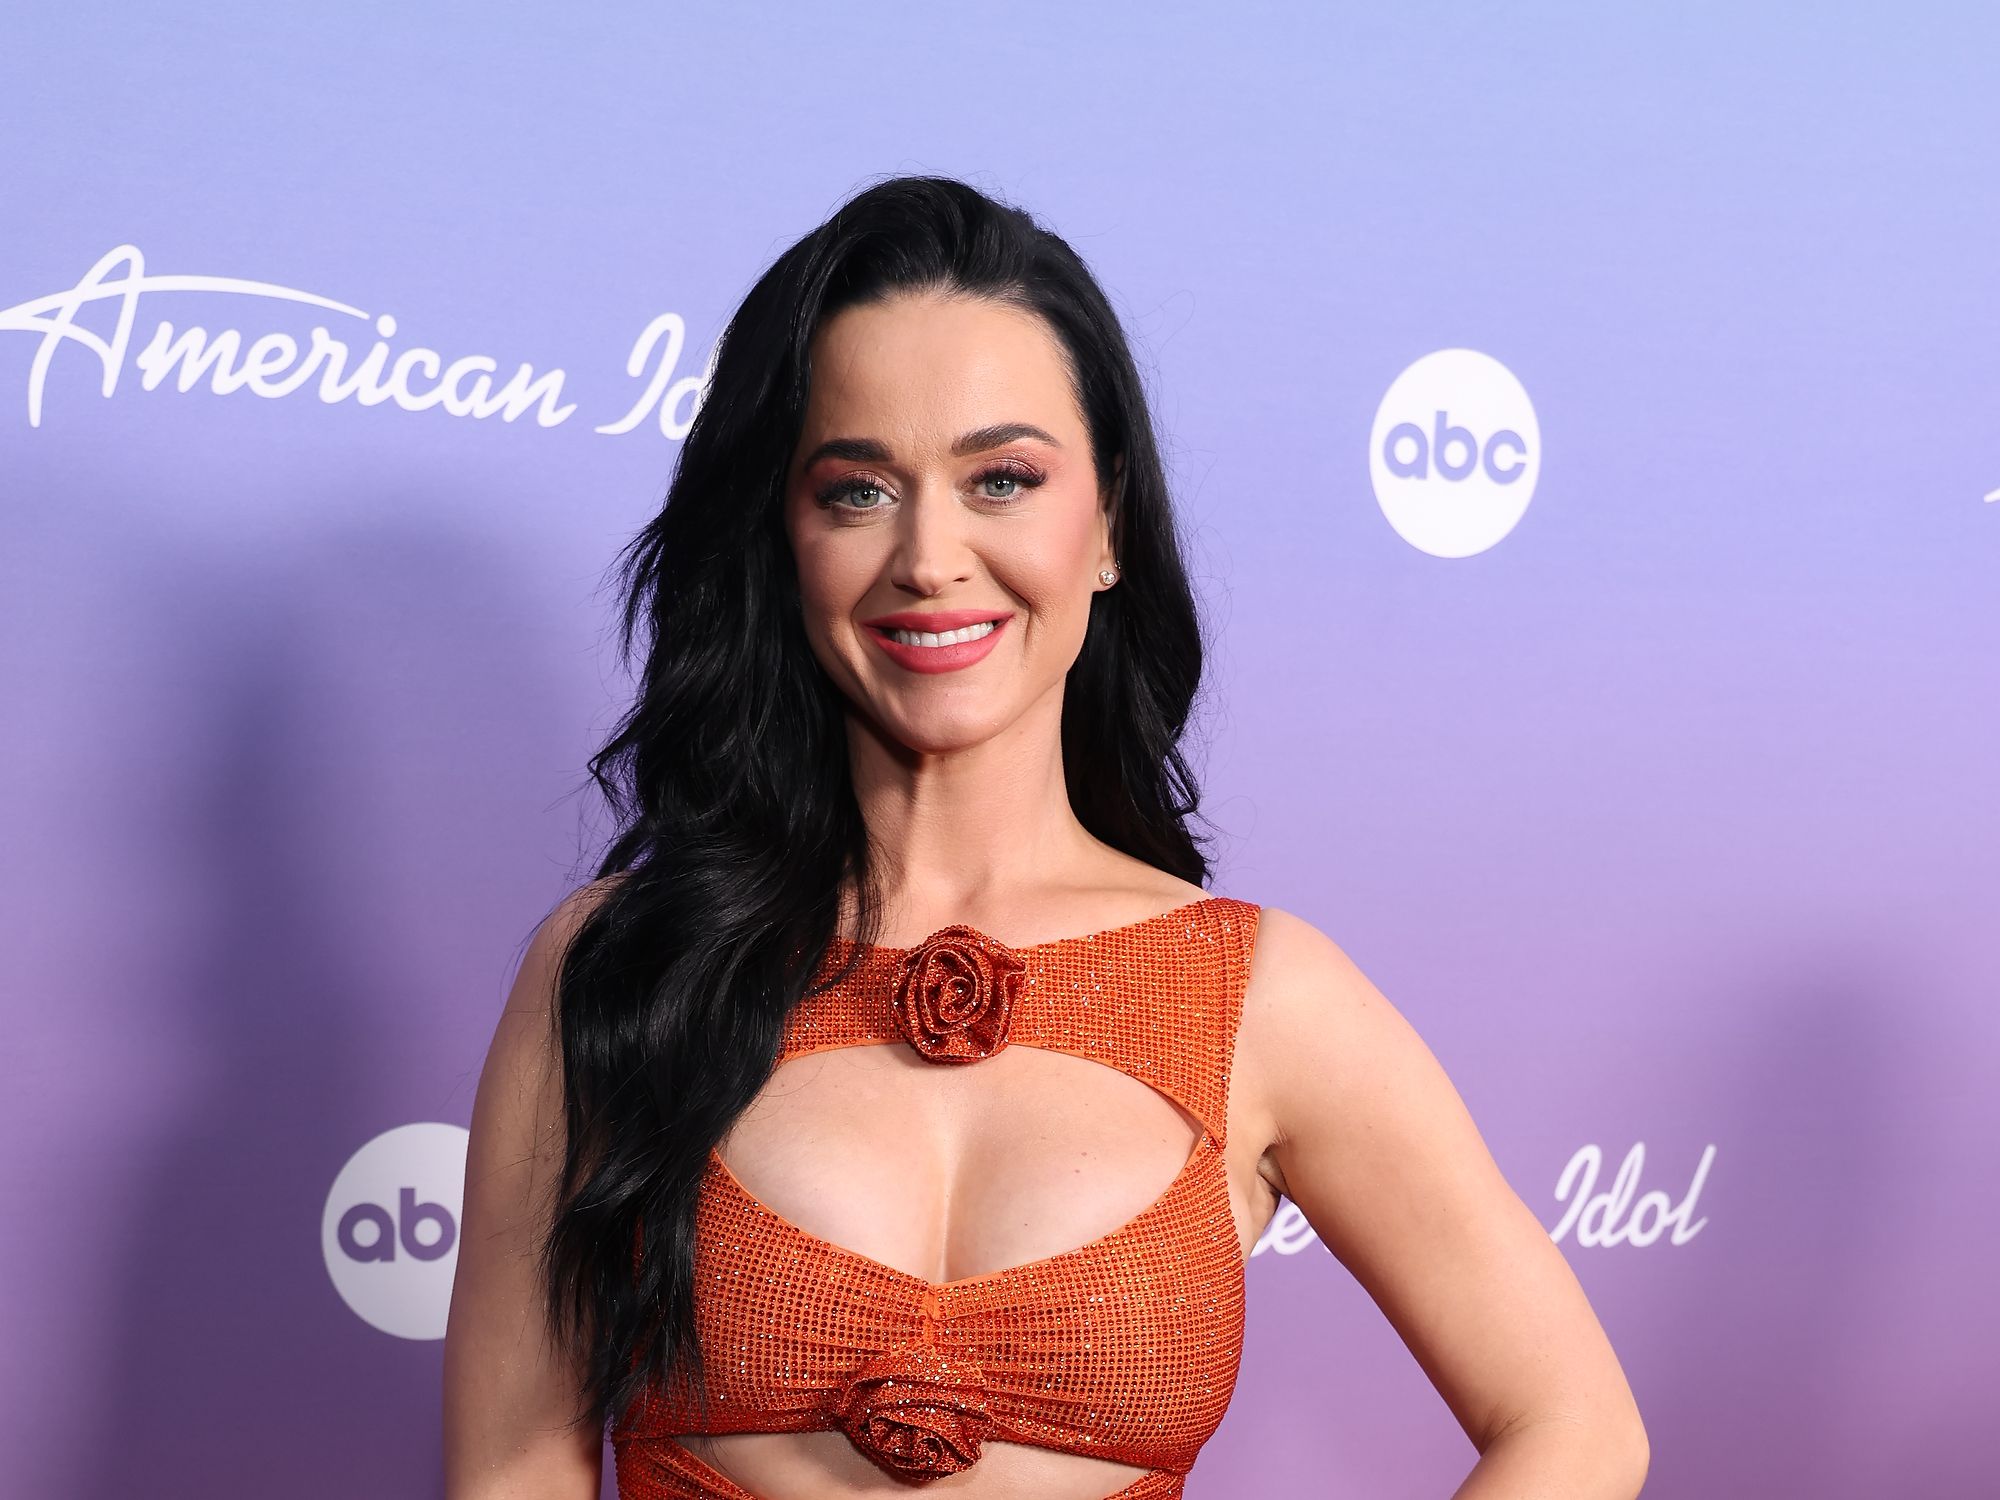 celia palomares recommends Katy Perry Super Hot